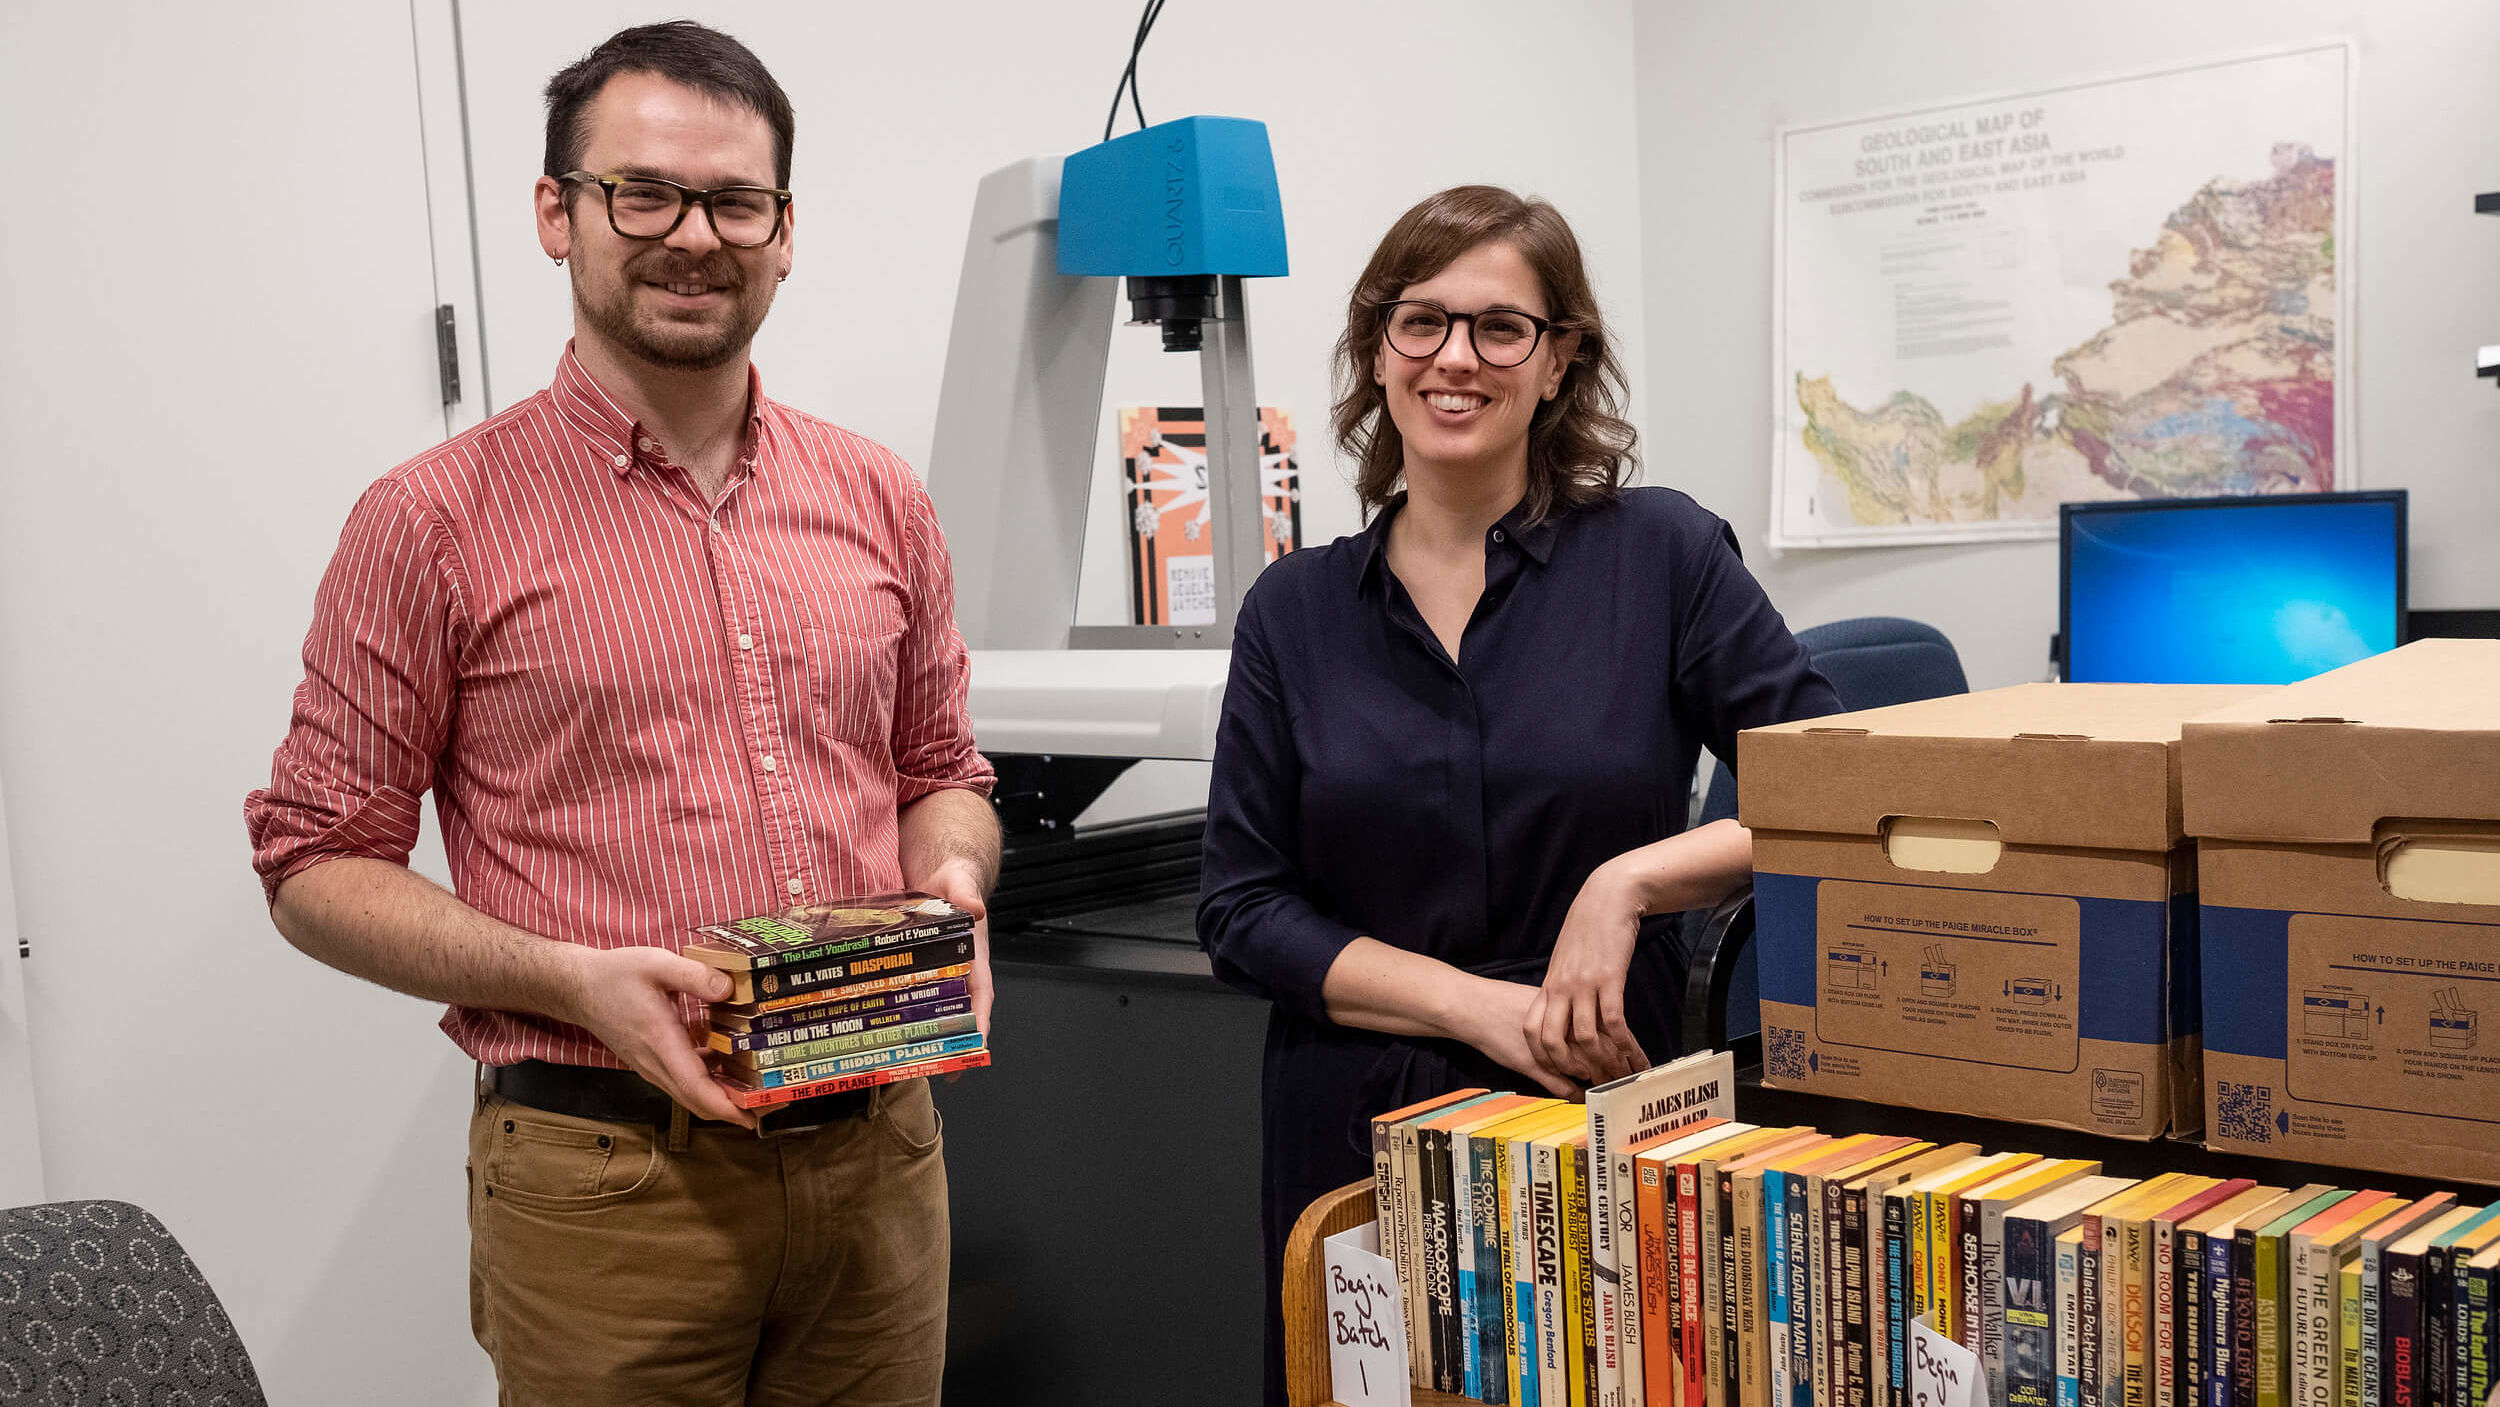 Librarians Michael Carroll and Stefanie Ramsay are part of a team at Temple Libraries digitizing science fiction books.